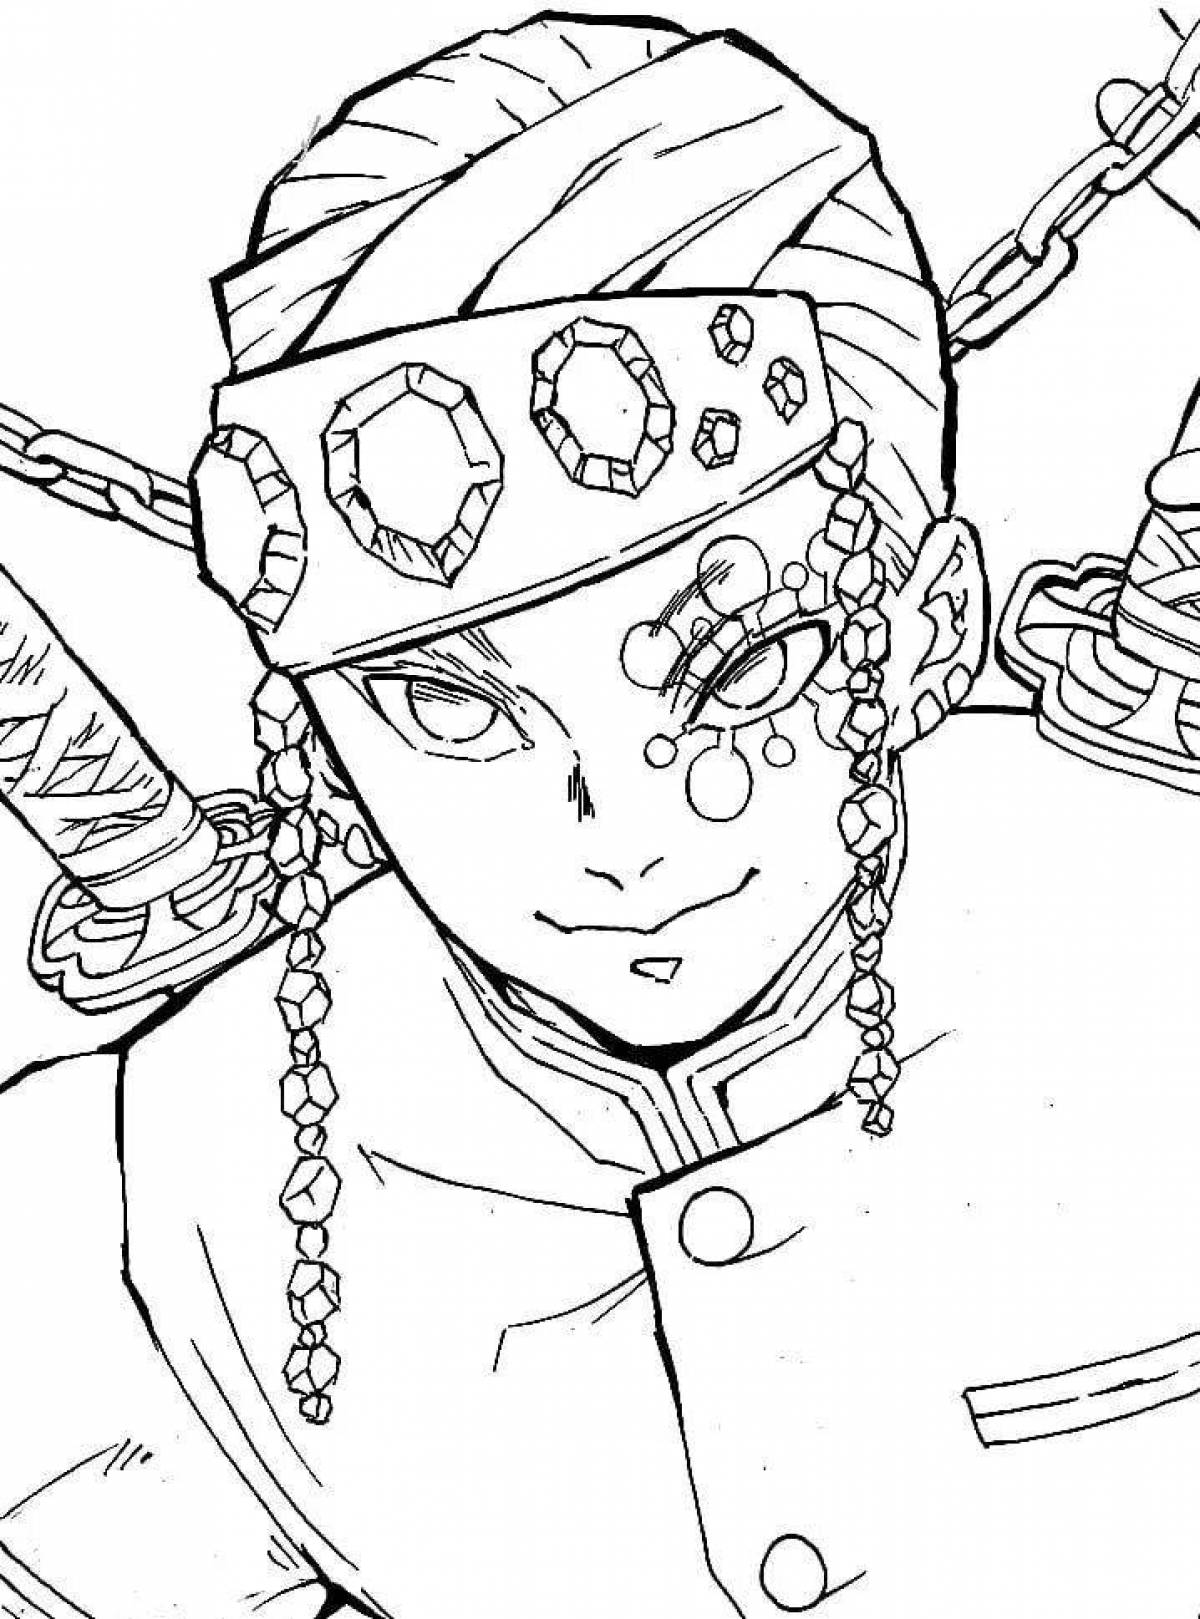 Tengen holiday coloring page